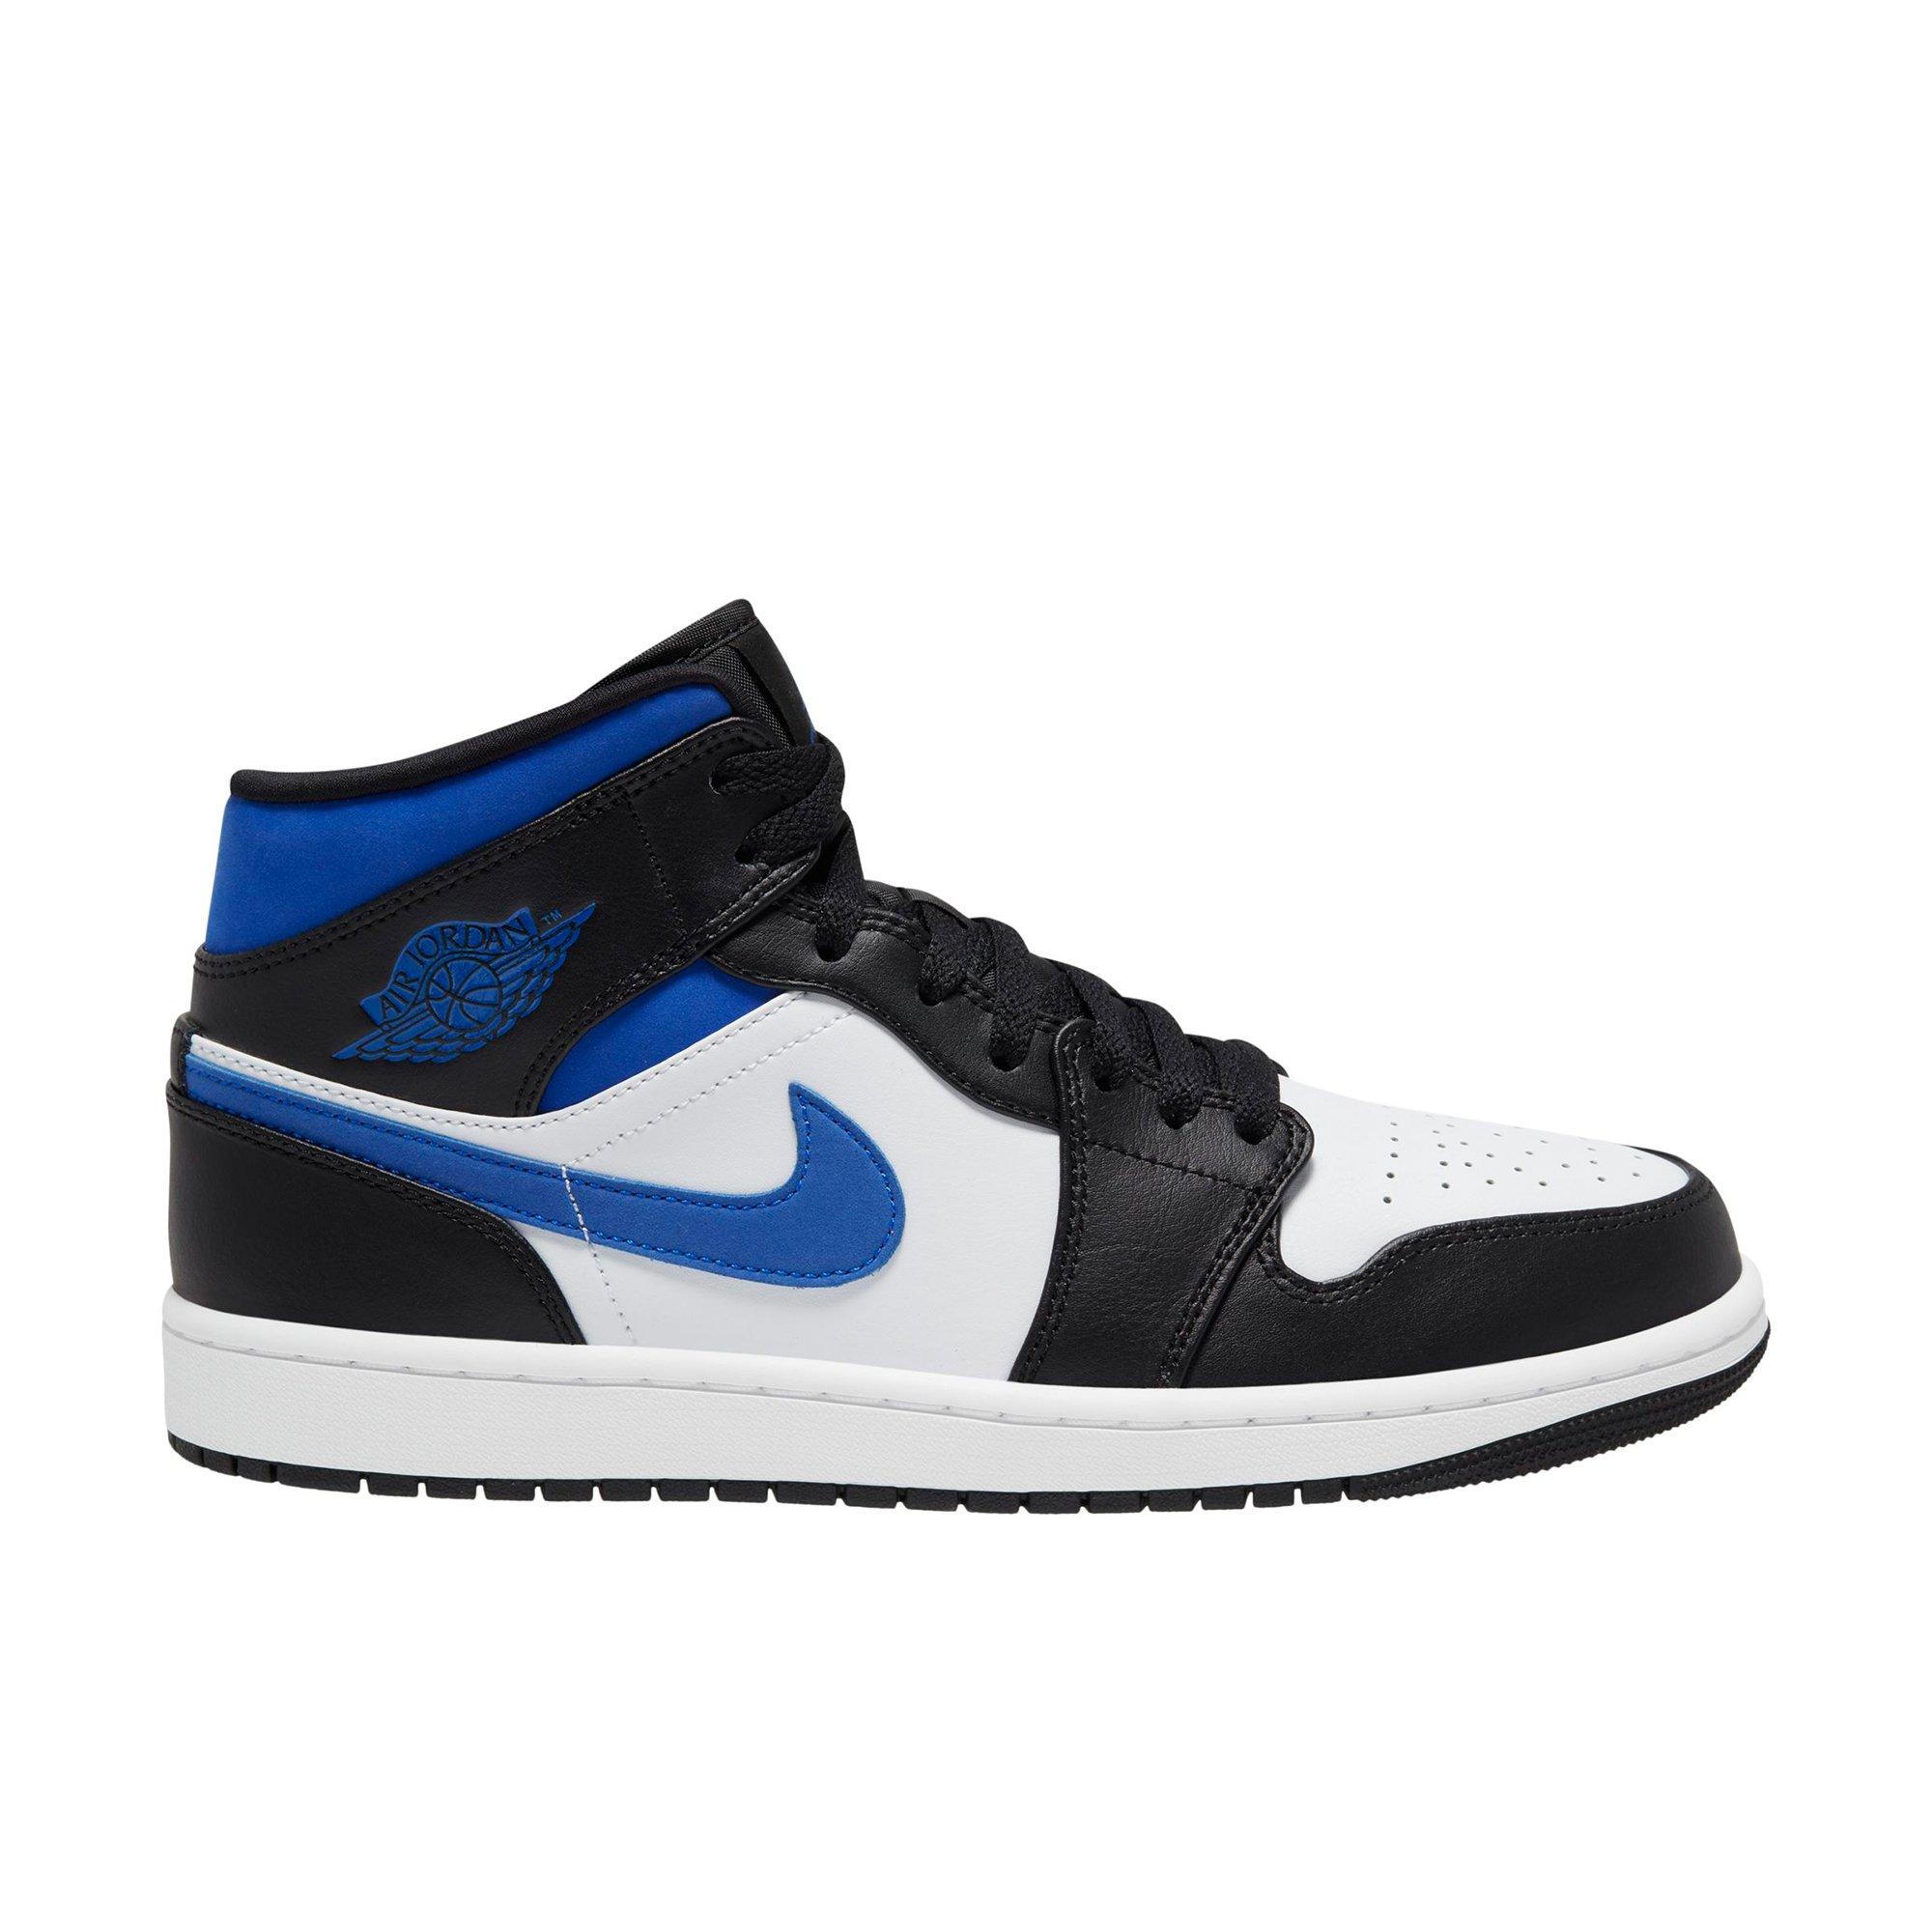 black and white and blue jordans